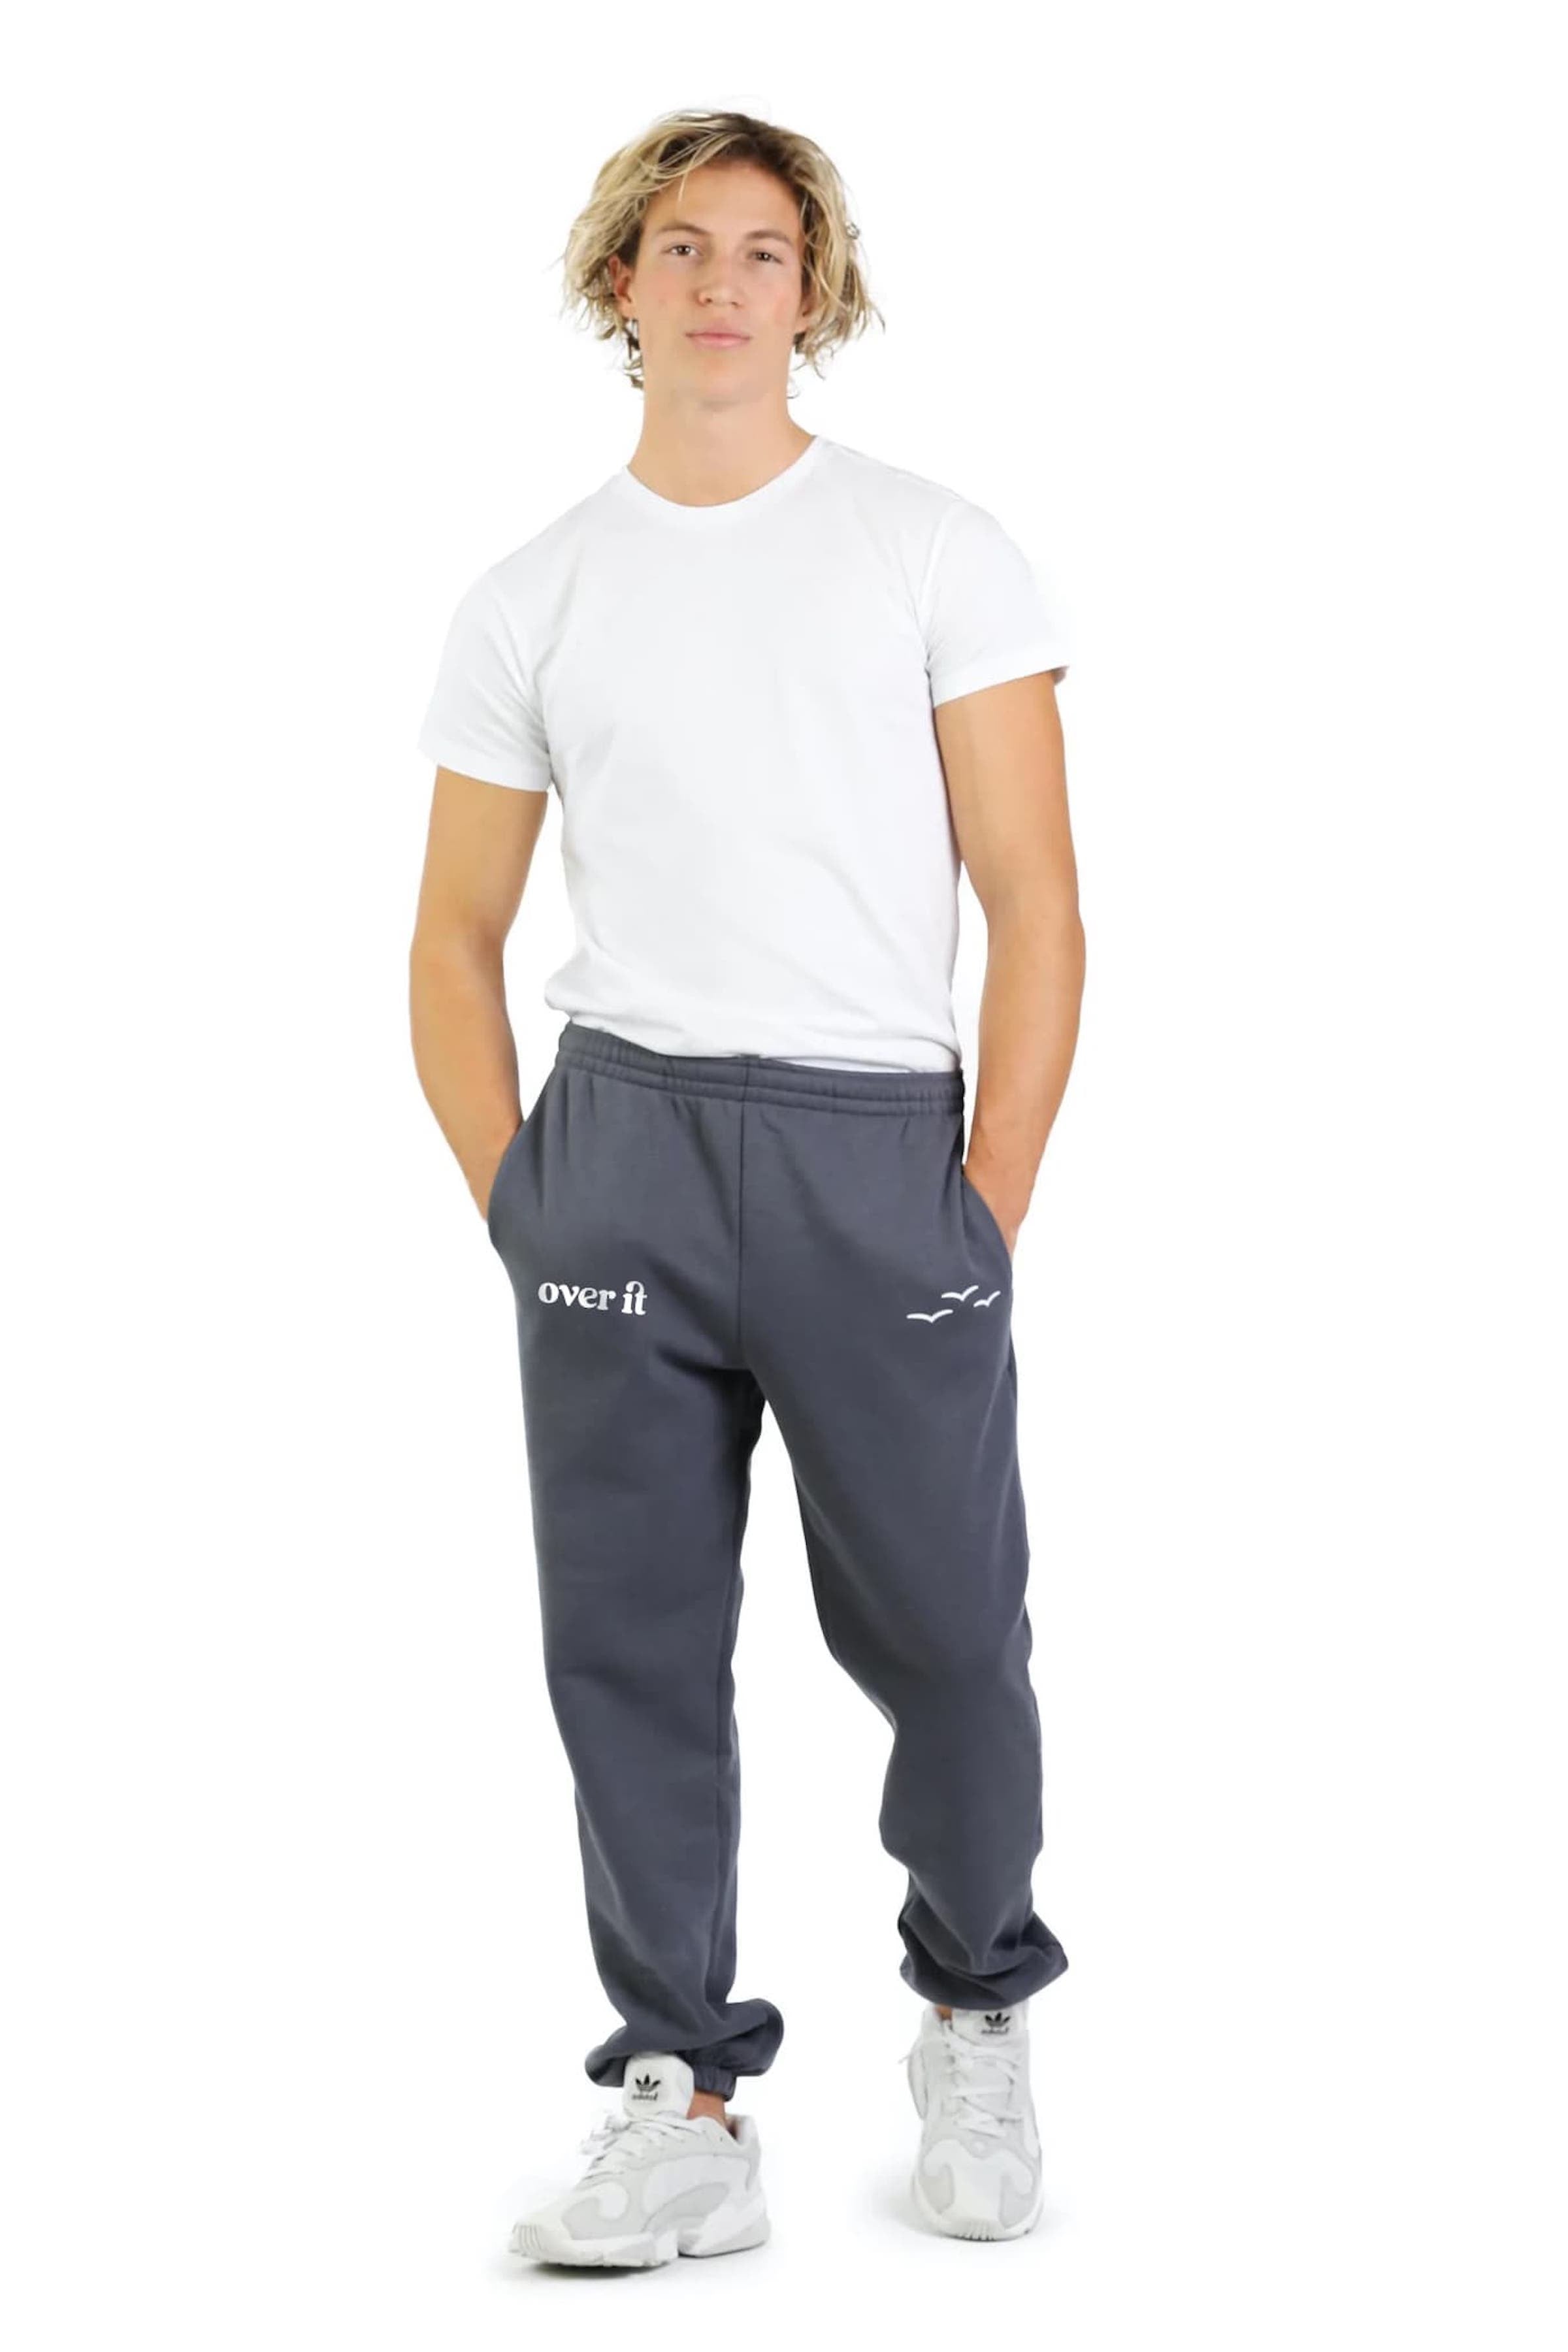 Cheeky relaxed jogger in navy wash